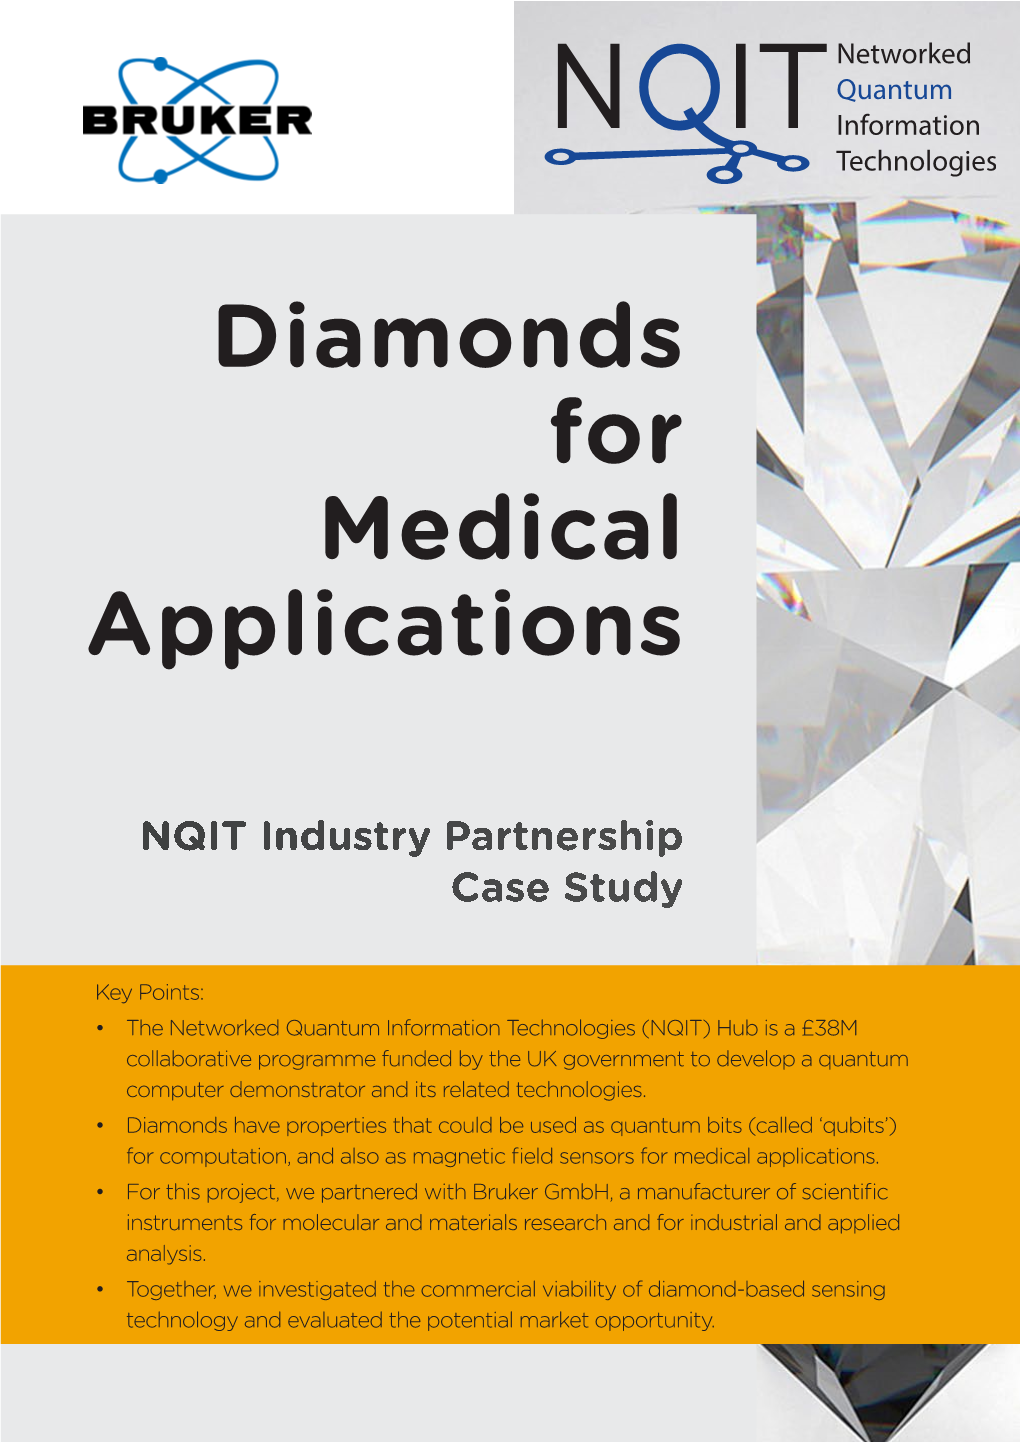 Diamonds for Medical Applications